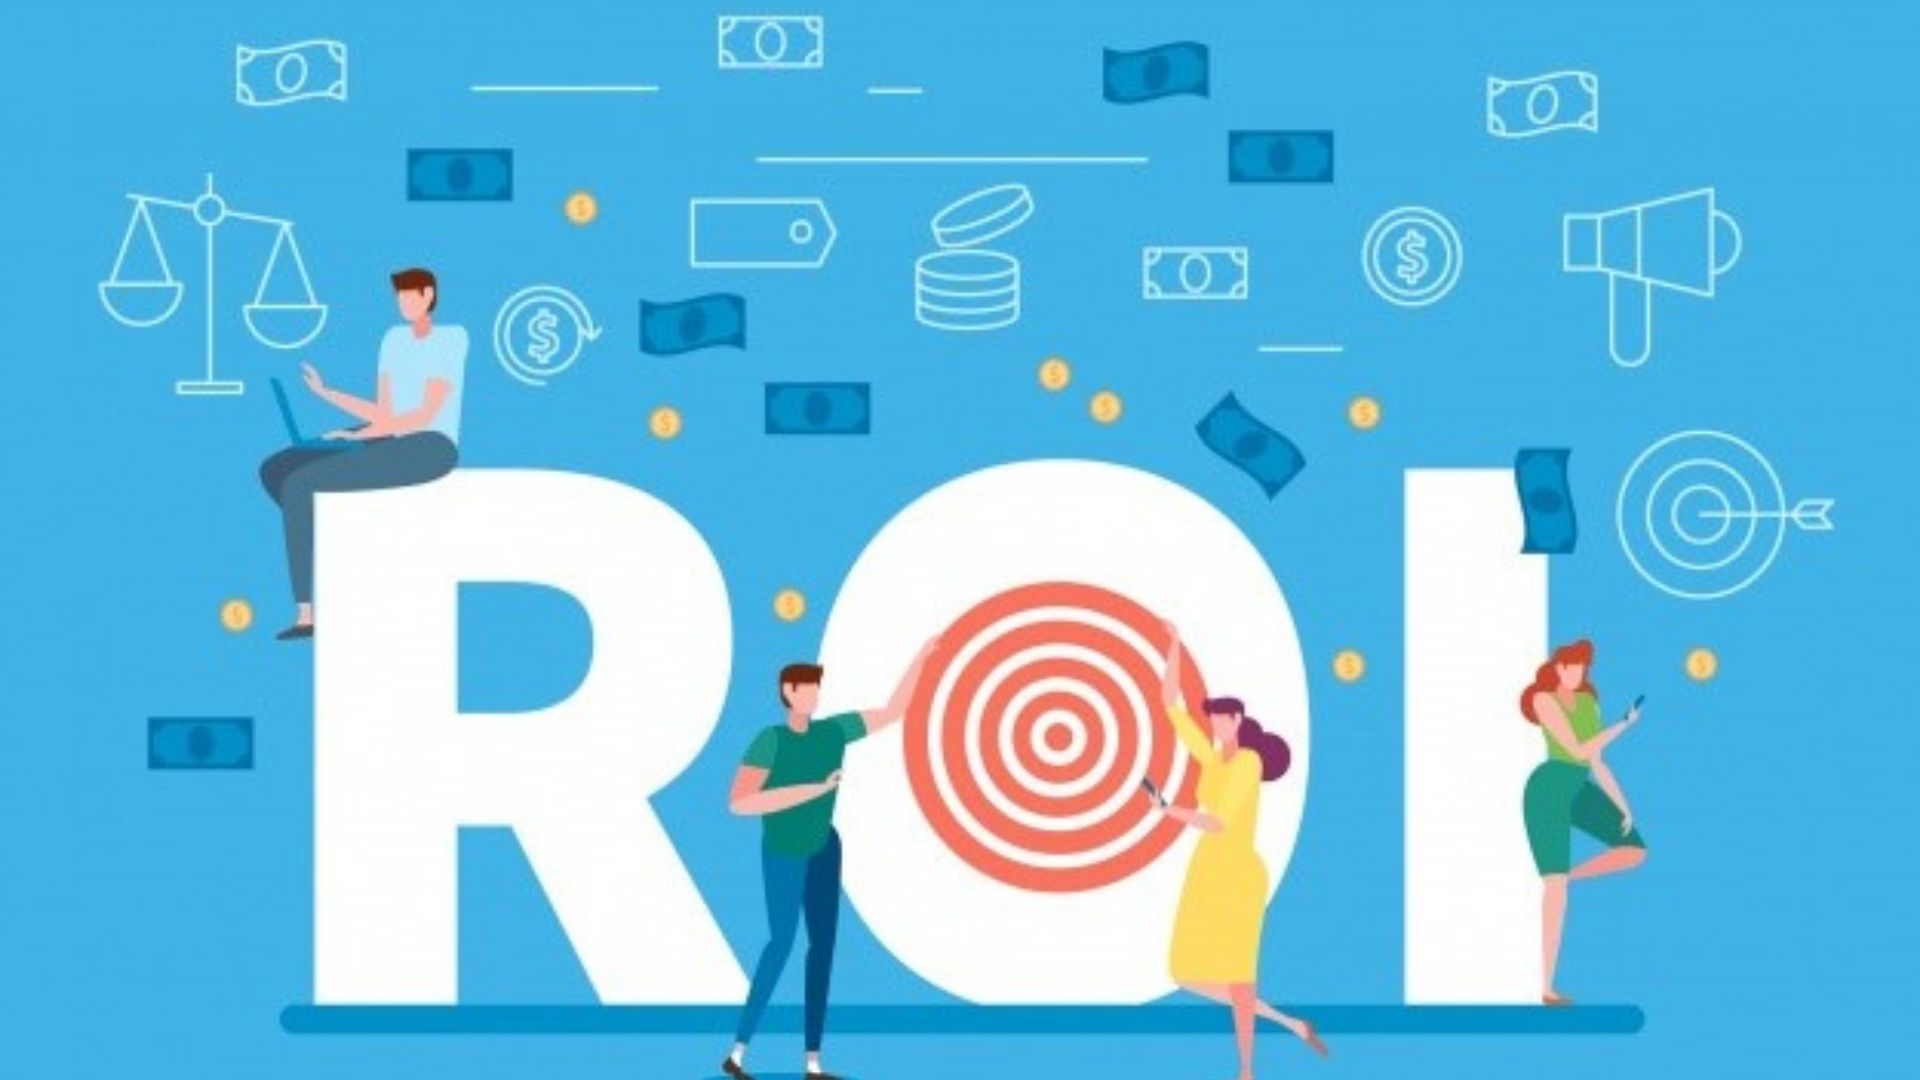 The real ROI on SEO might vary significantly based on various factors